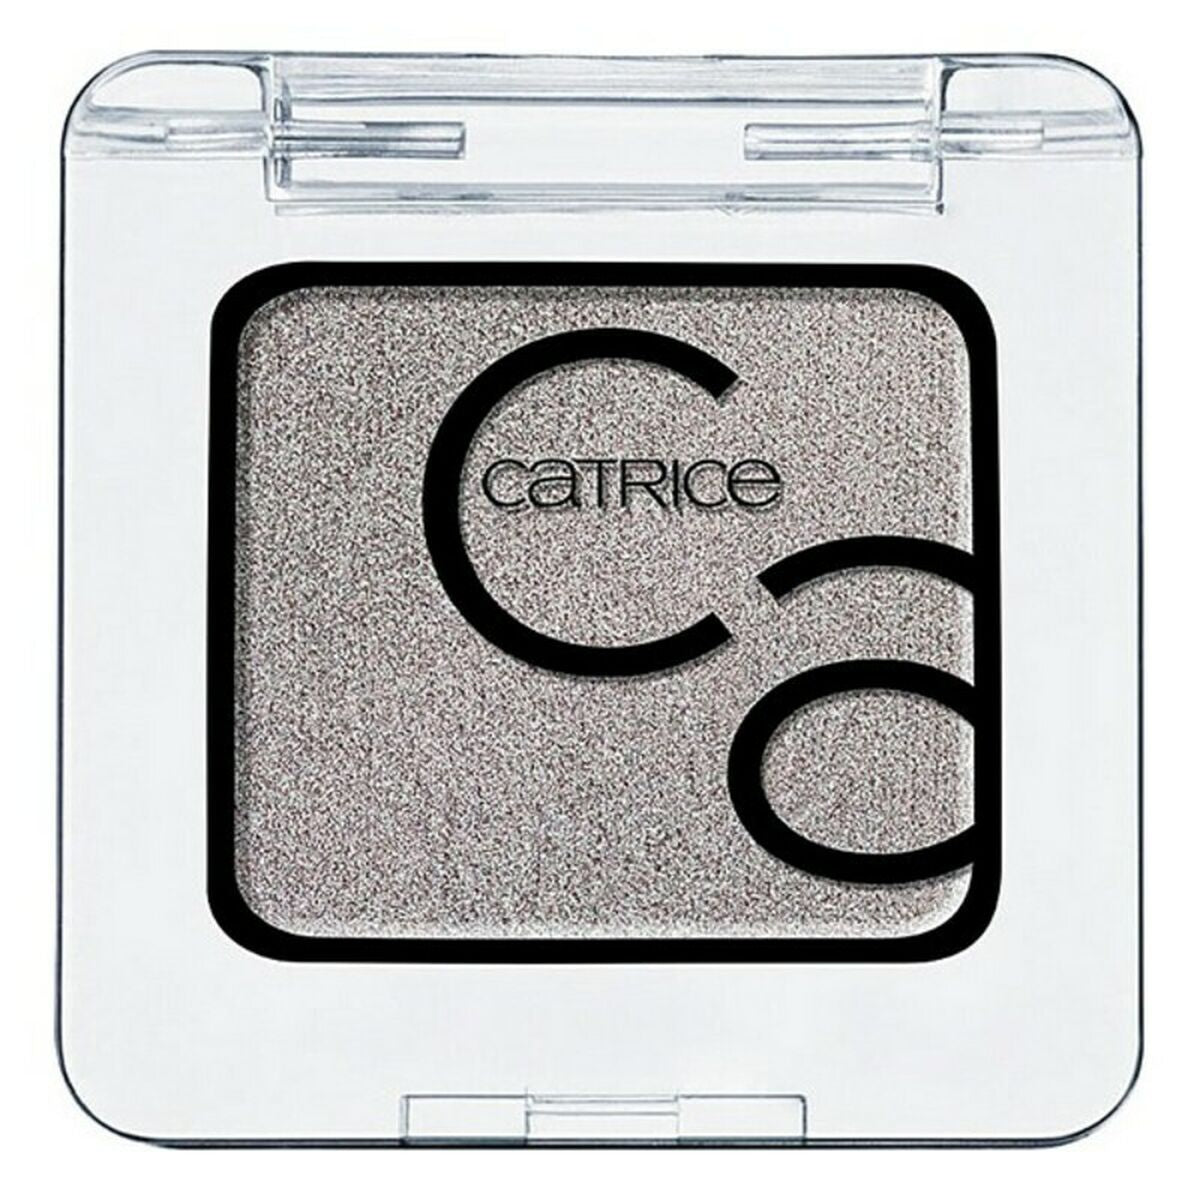 Art Couleurs Eyeshadow Couleurs Catrice (2 g)